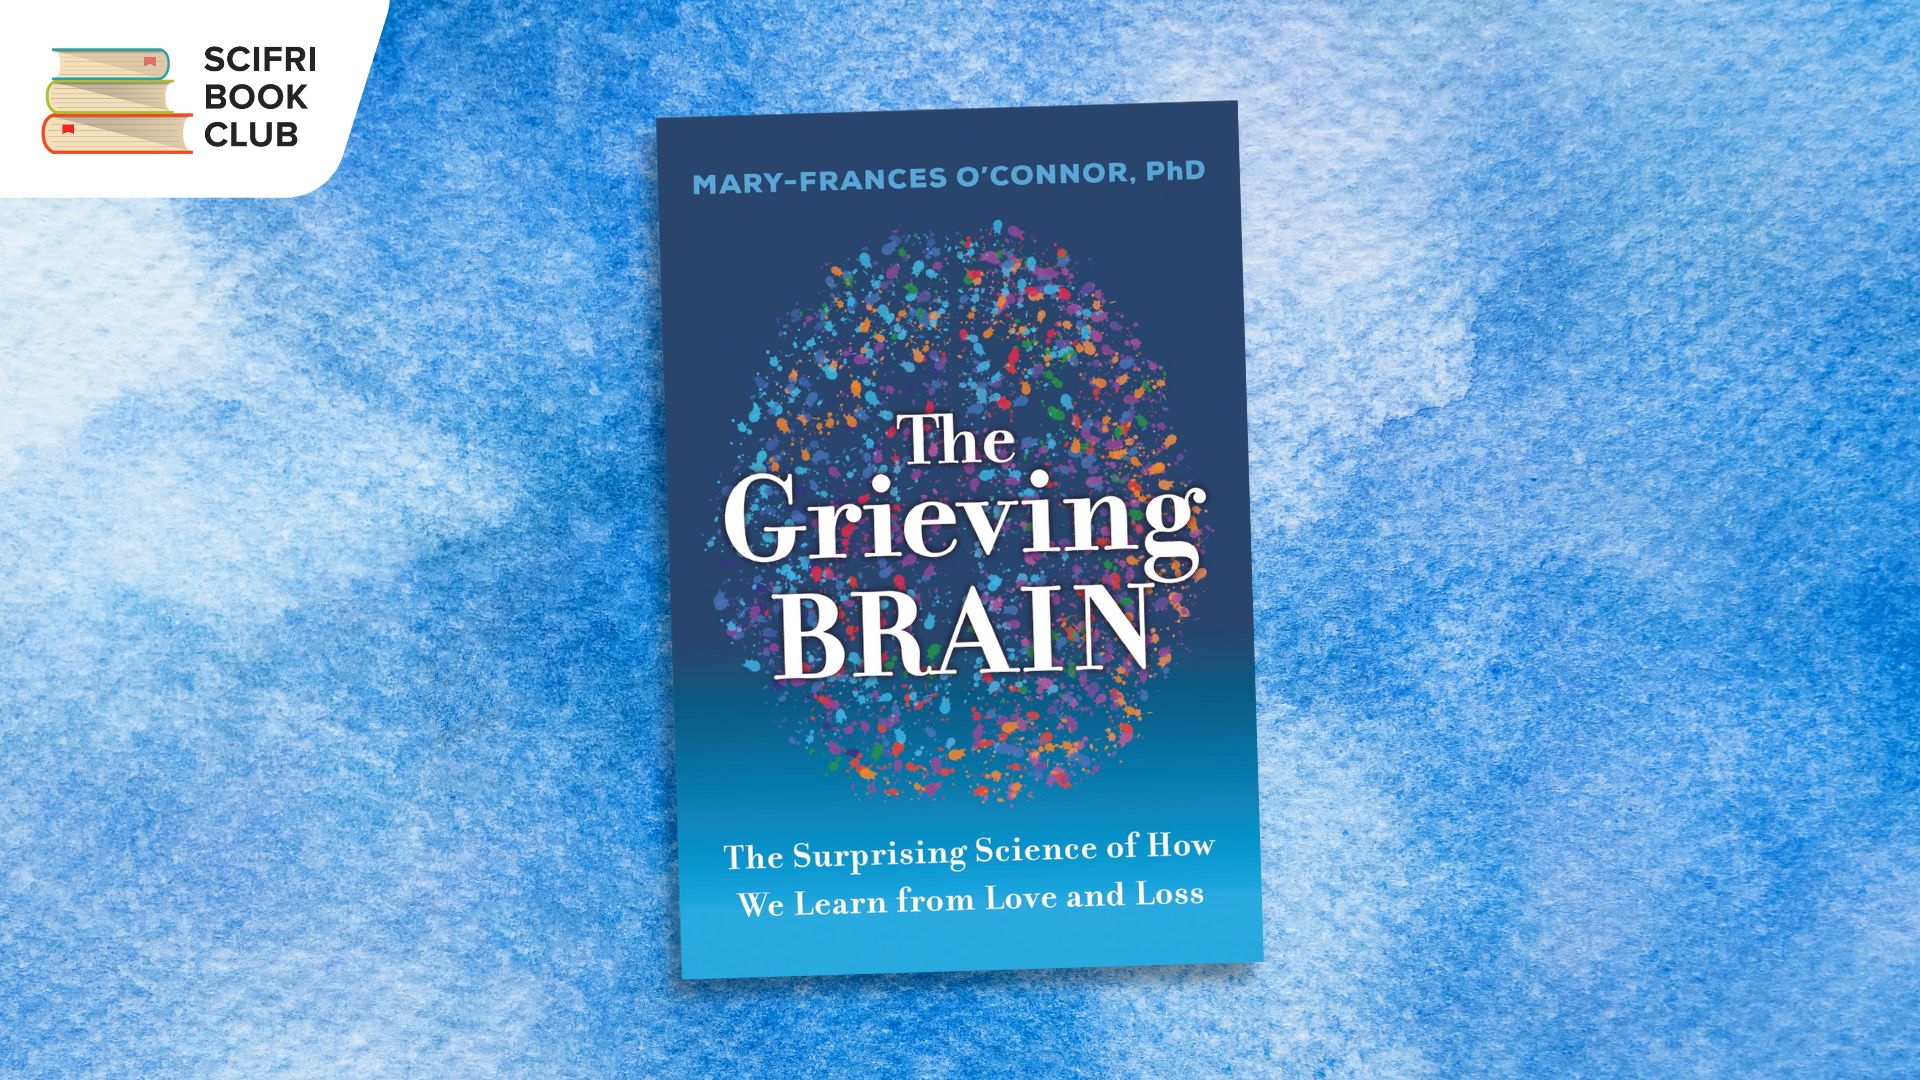 The cover of THE GRIEVING BRAIN by Mary-Frances O'Connor, PhD on top of a background of blue watercolor texture